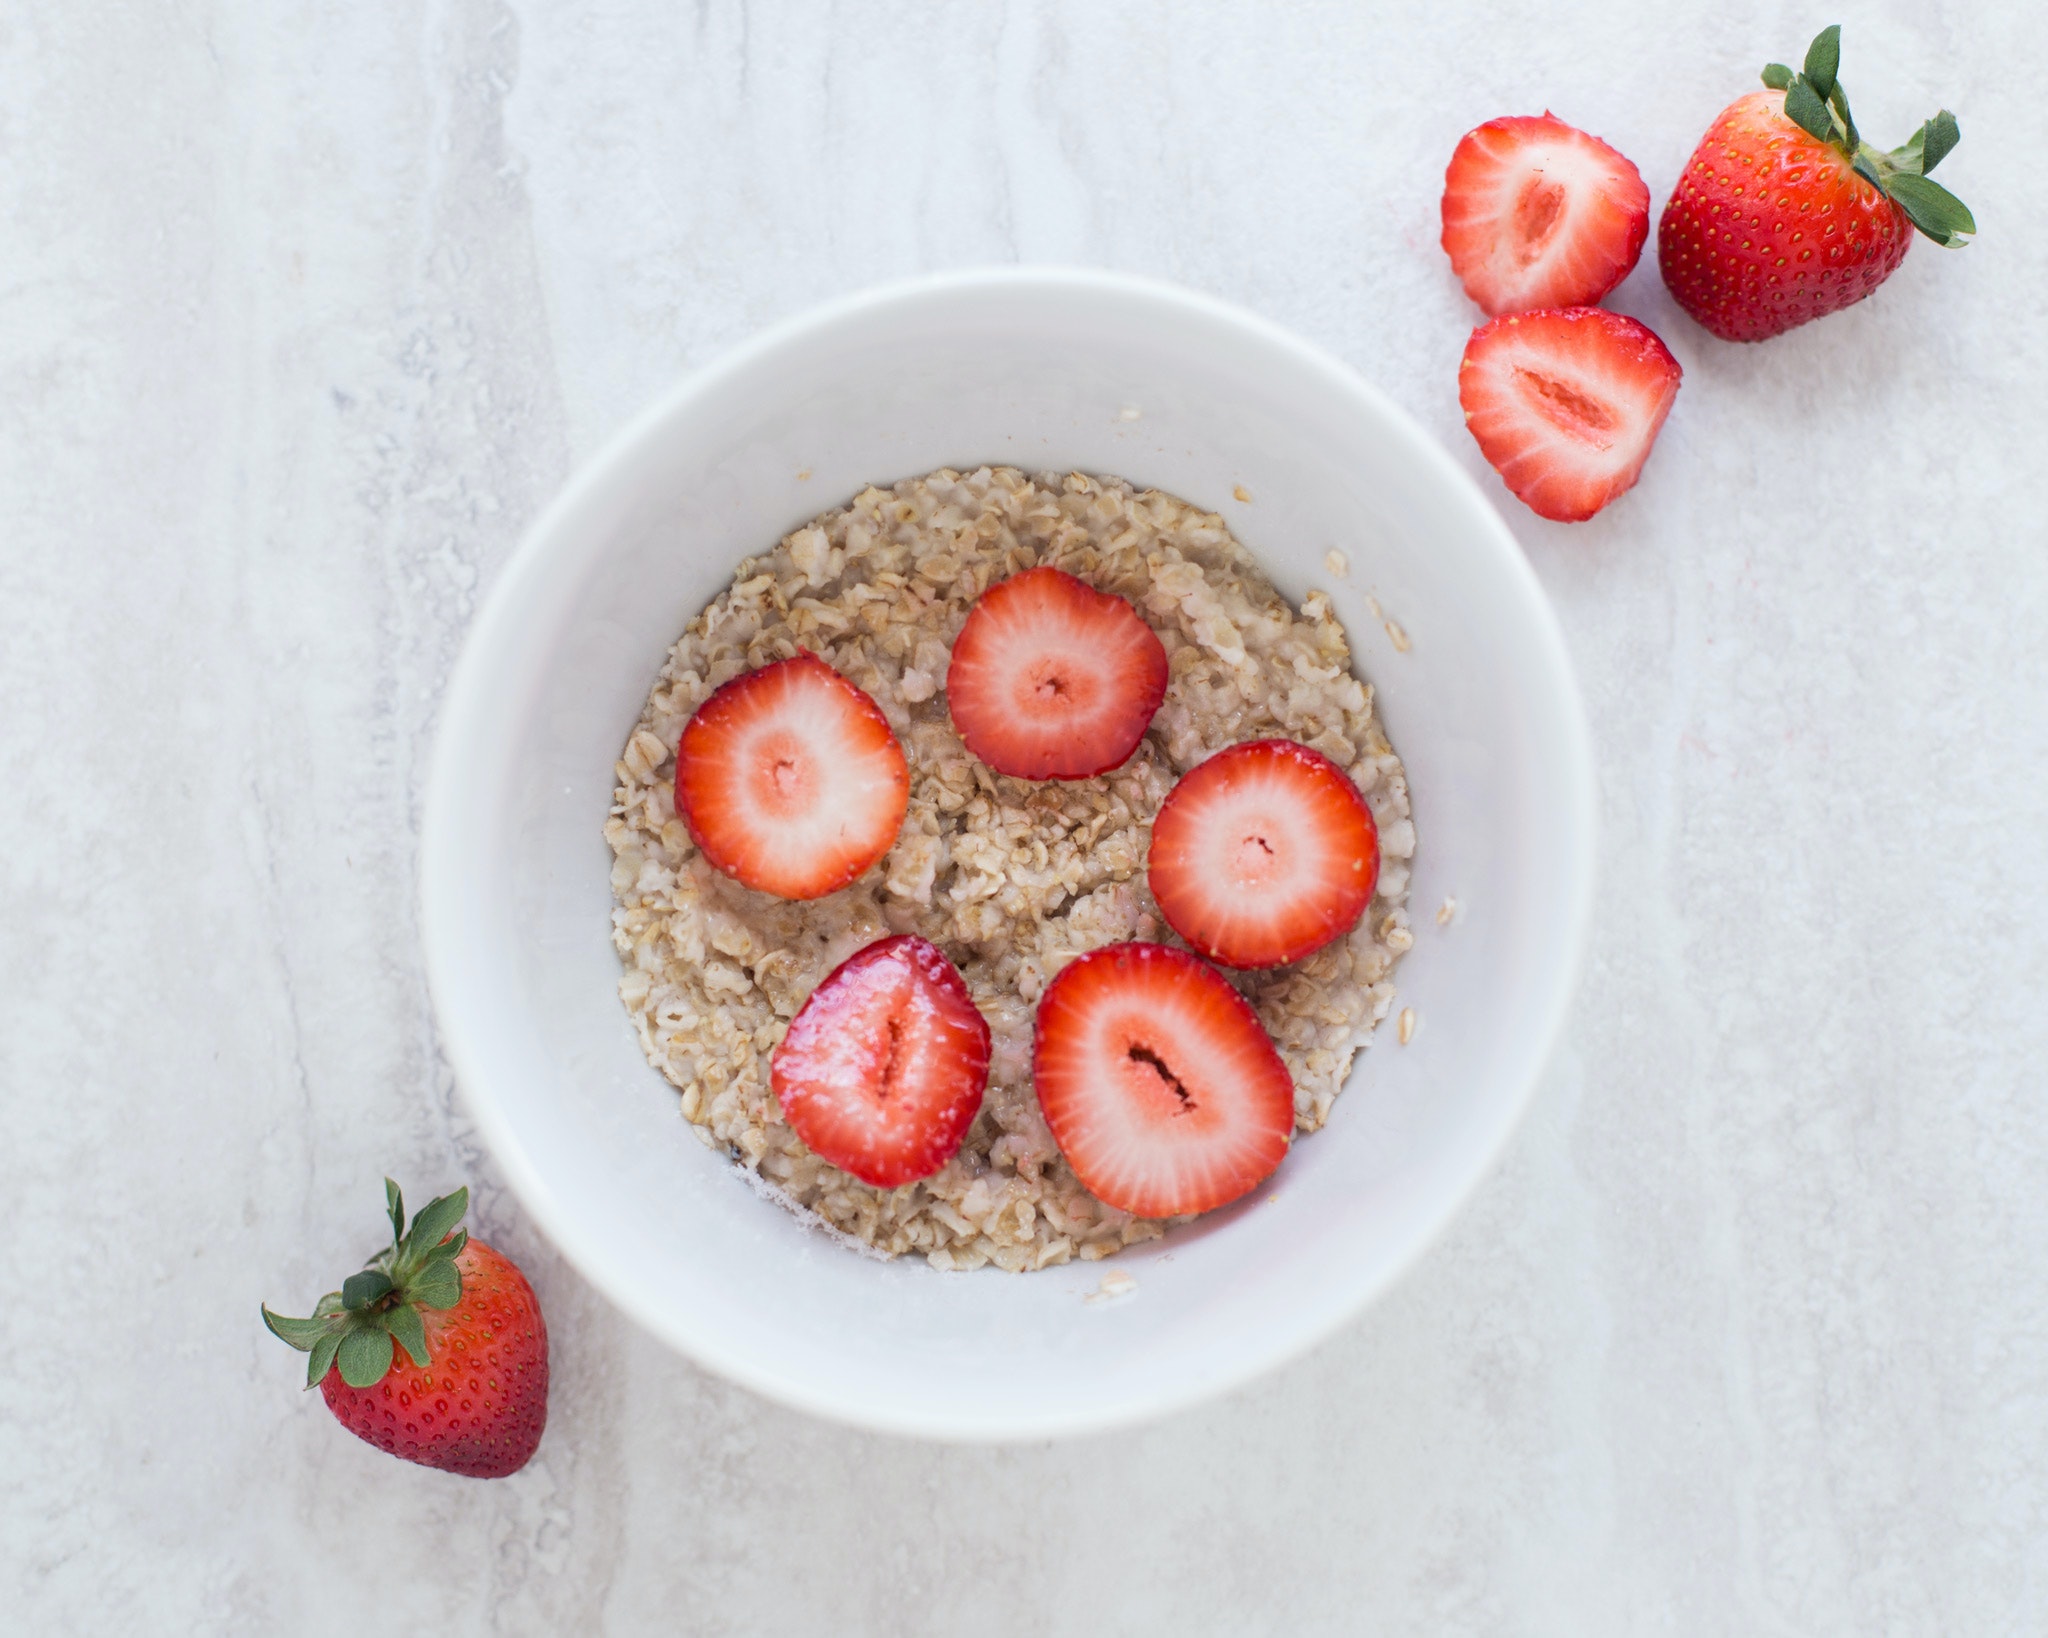 Sliced Strawberry Topped Oatmeal